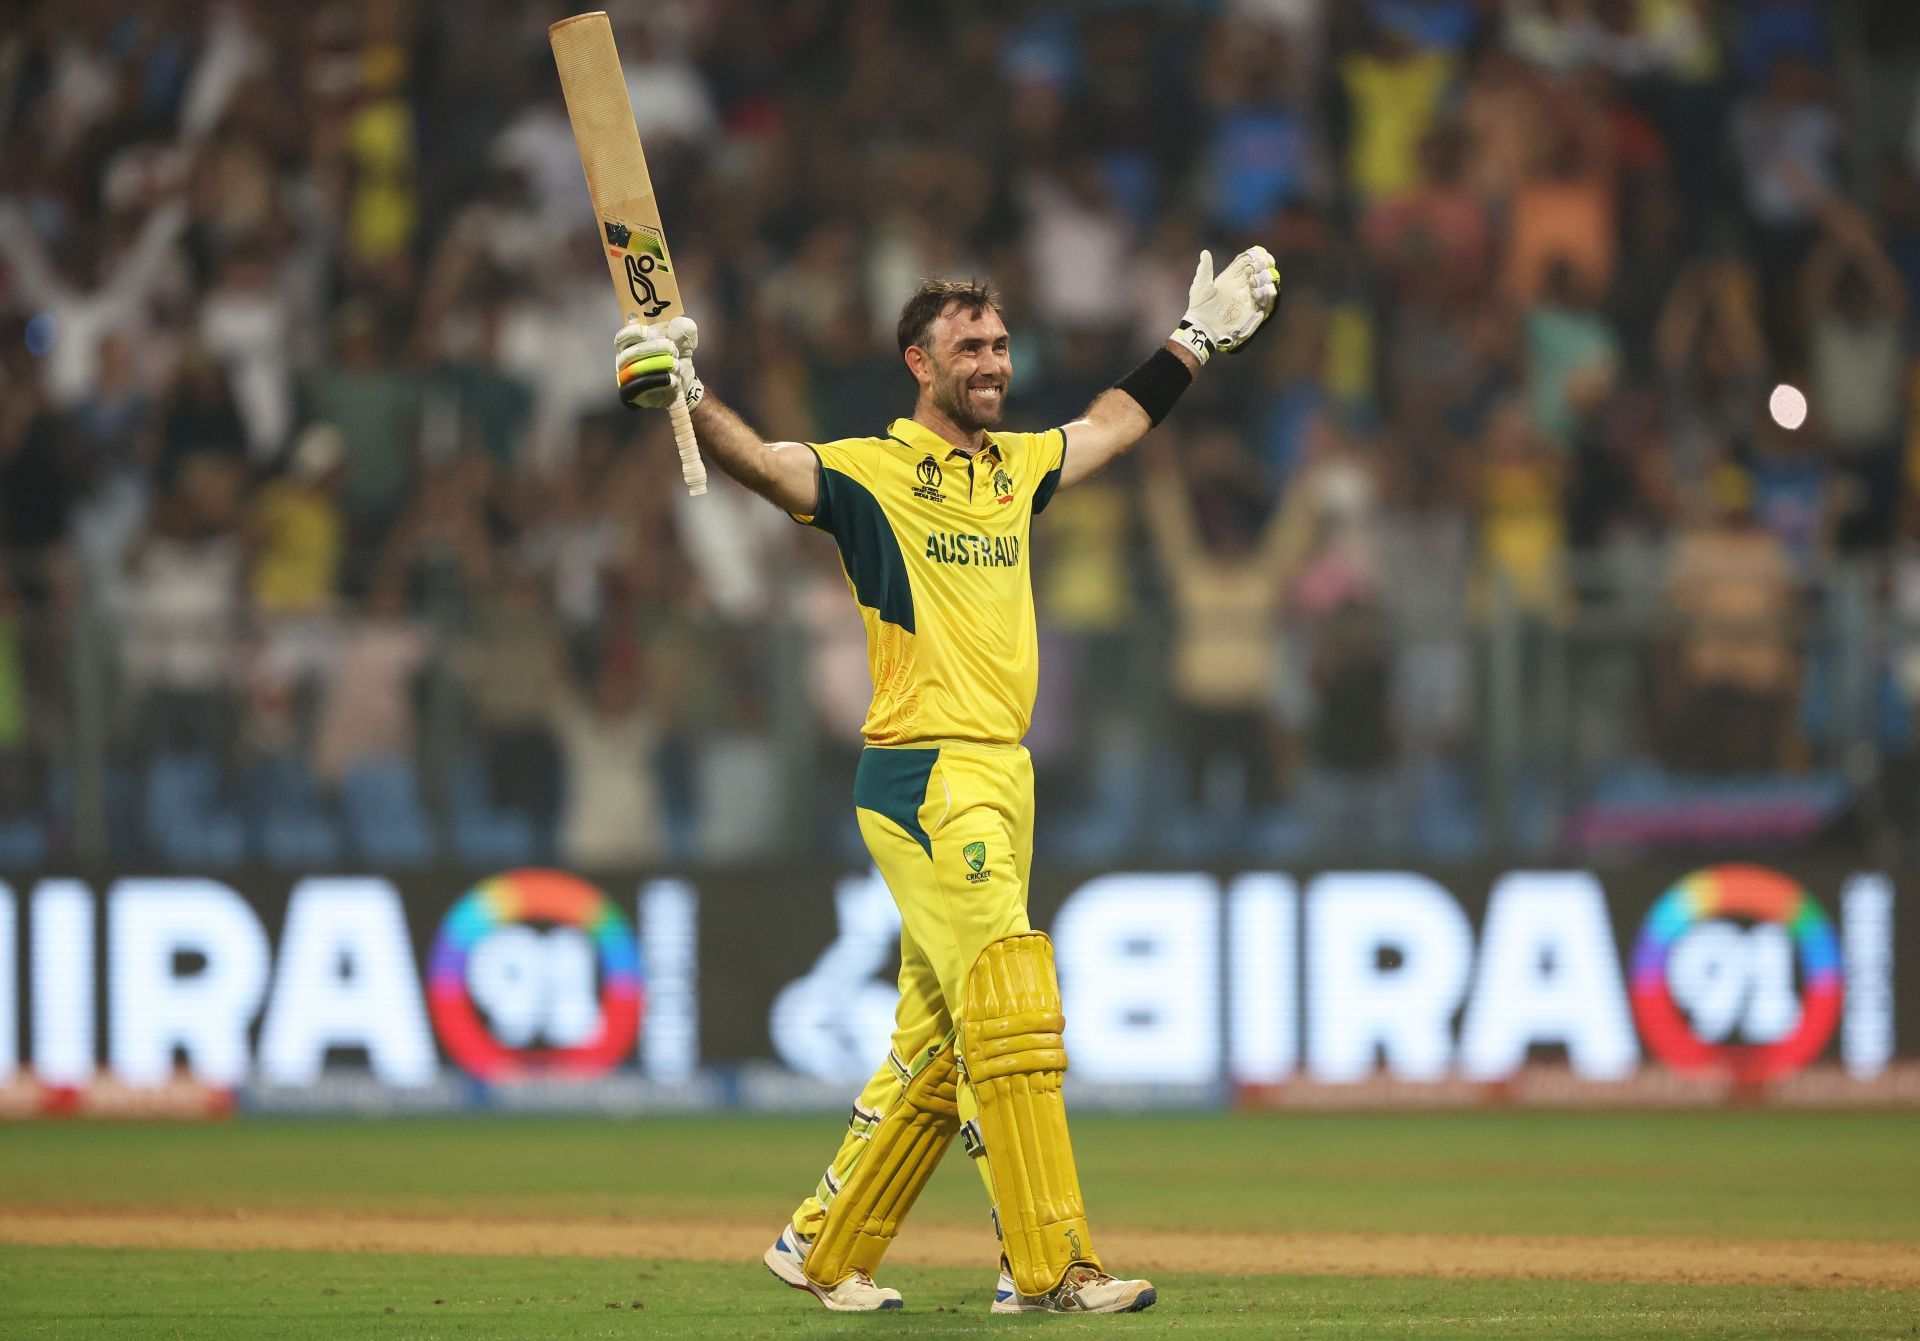 Glenn Maxwell delivered one of the greatest ODI knocks of all-time [Getty Images]